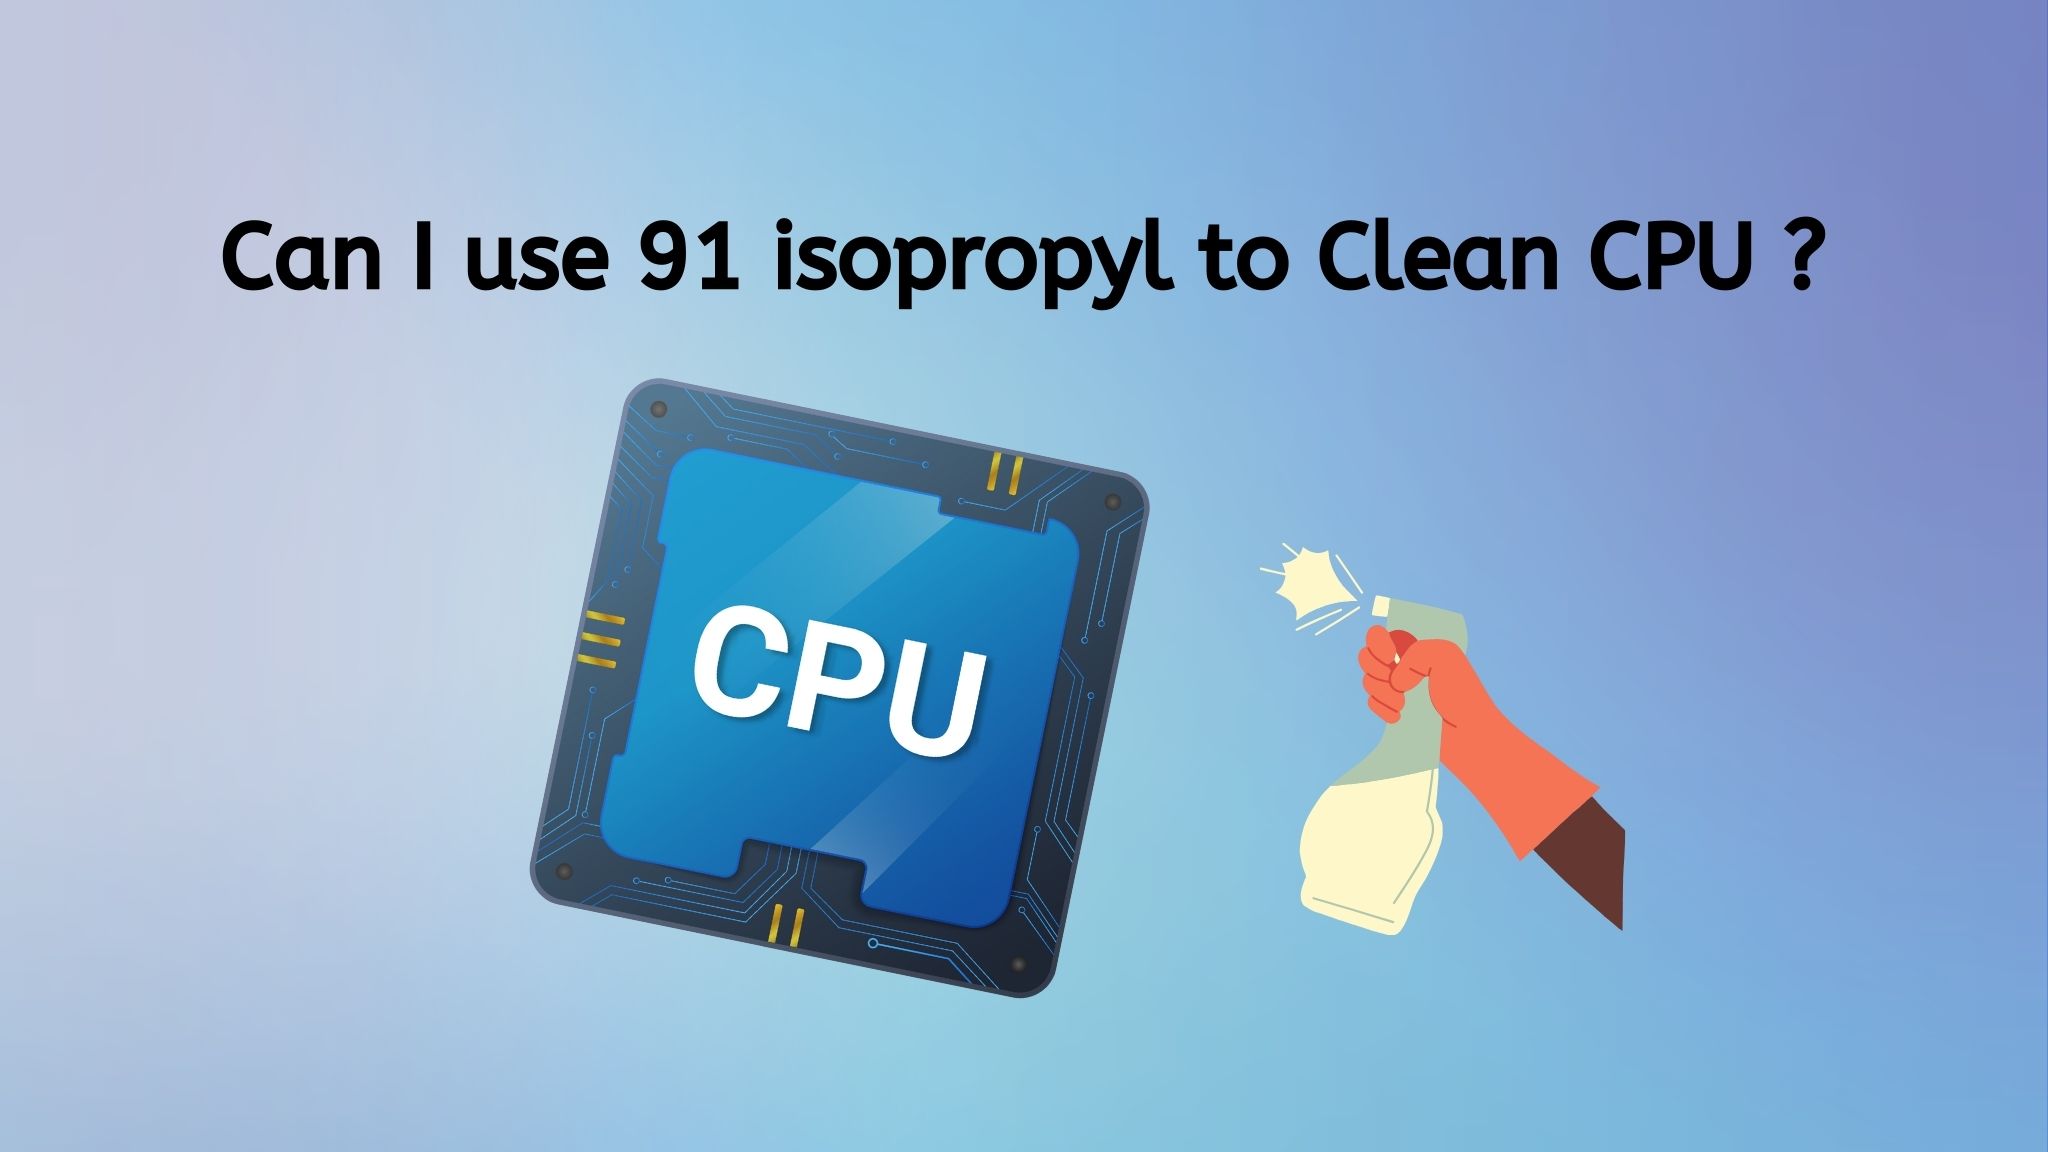 Can I use 91 isopropyl alcohol to clean CPU